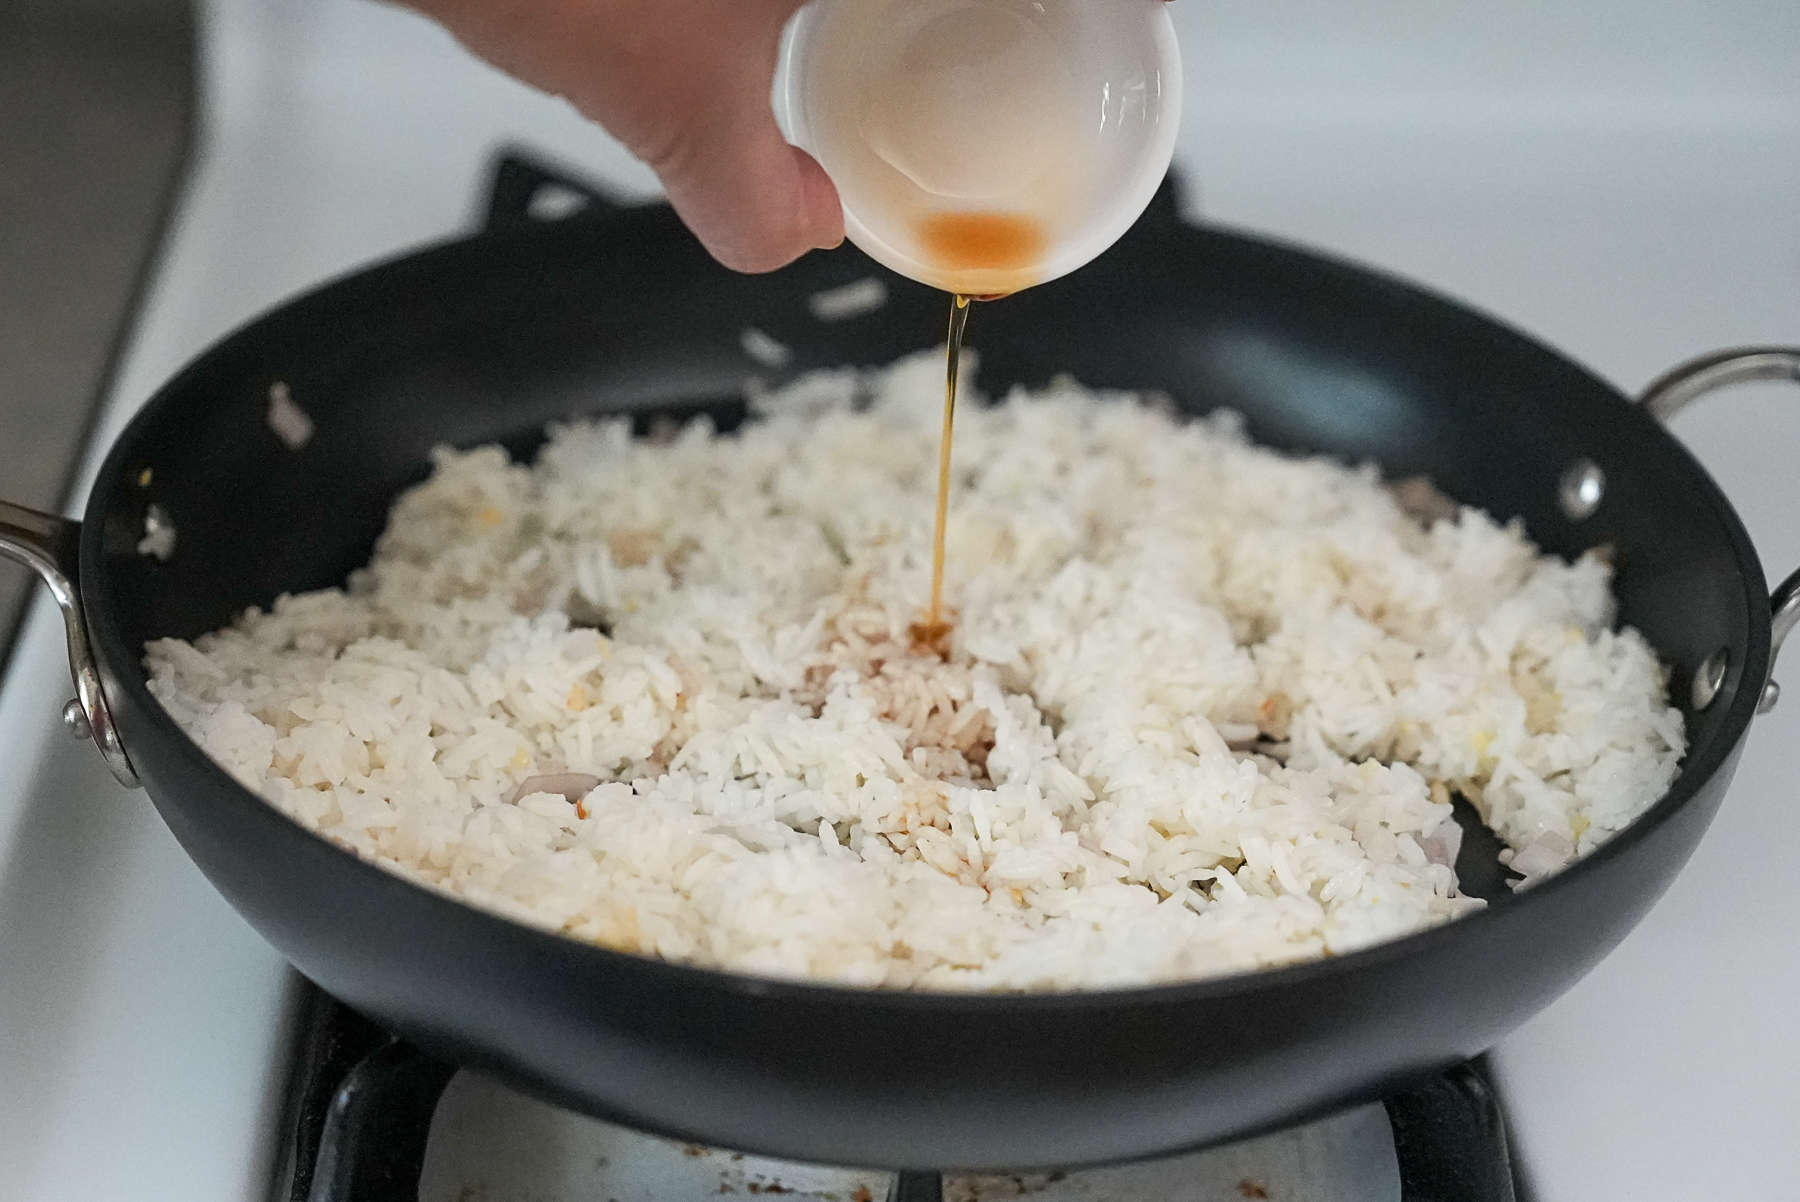 Add the rice and season with fish sauce, soy sauce